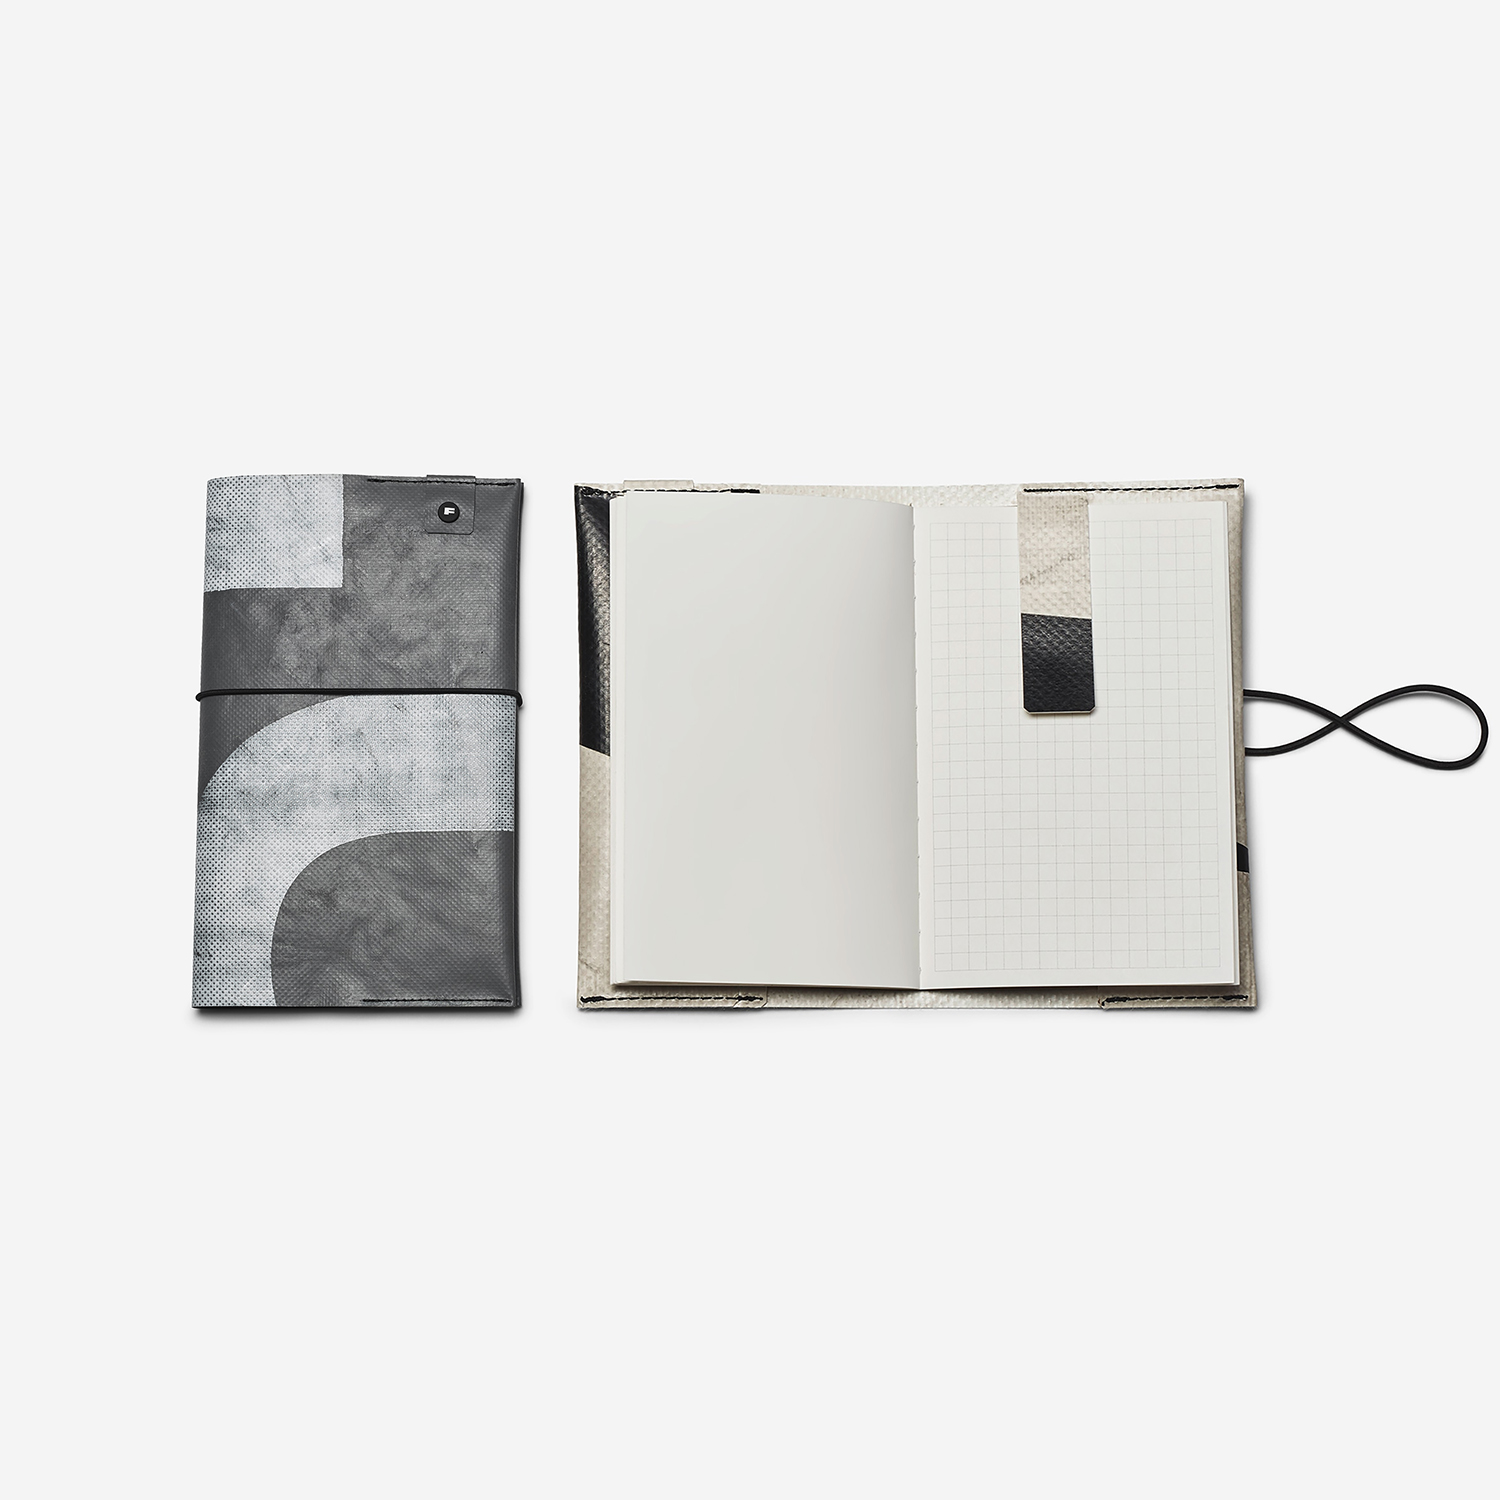 FREITAG :: F242 STU :: The slim journal with a sleeve in the cover